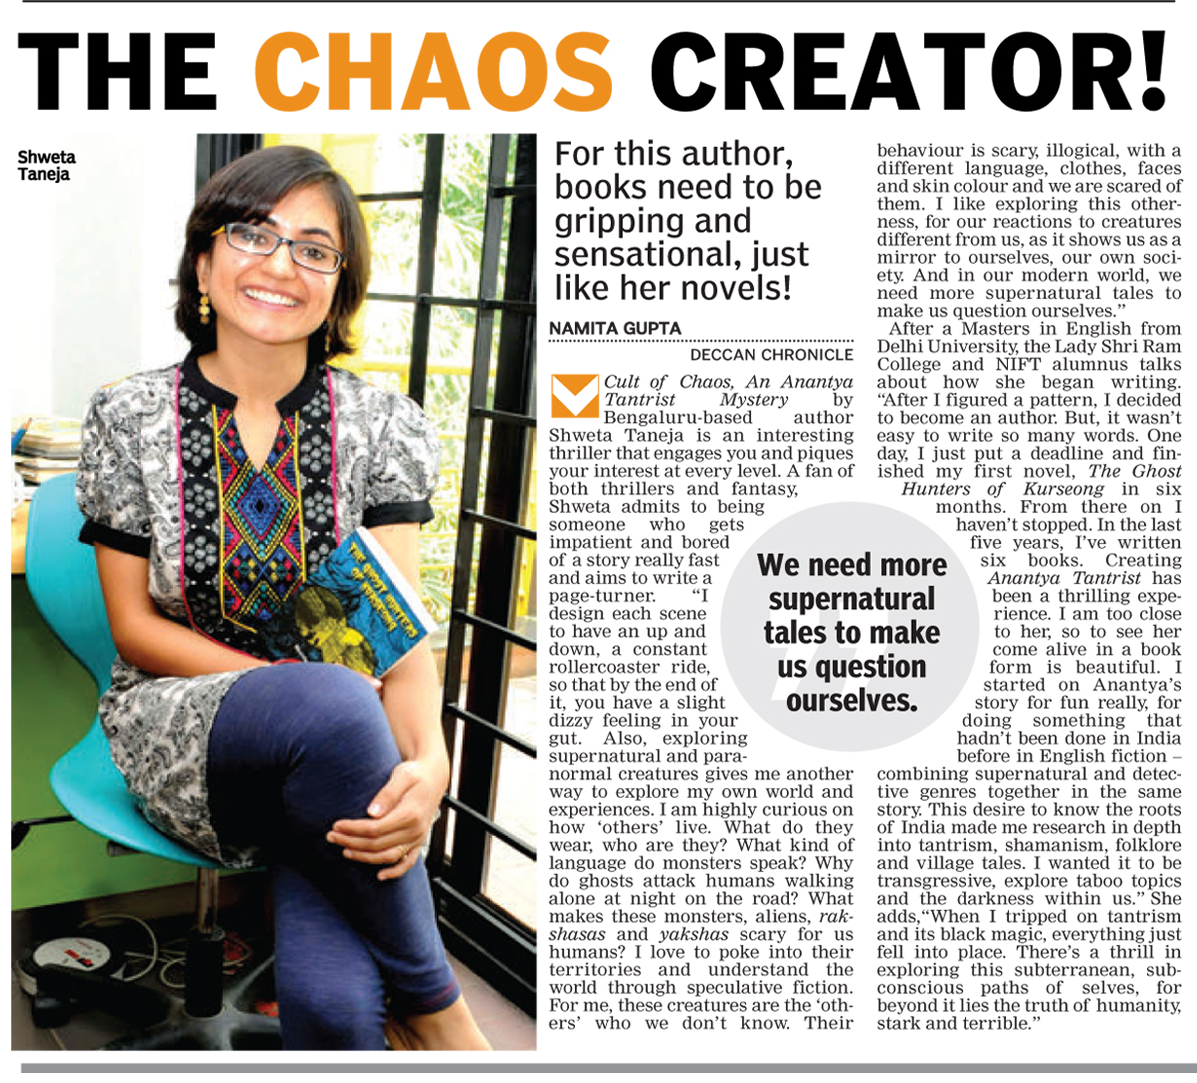 Interview in Deccan Chronicle 